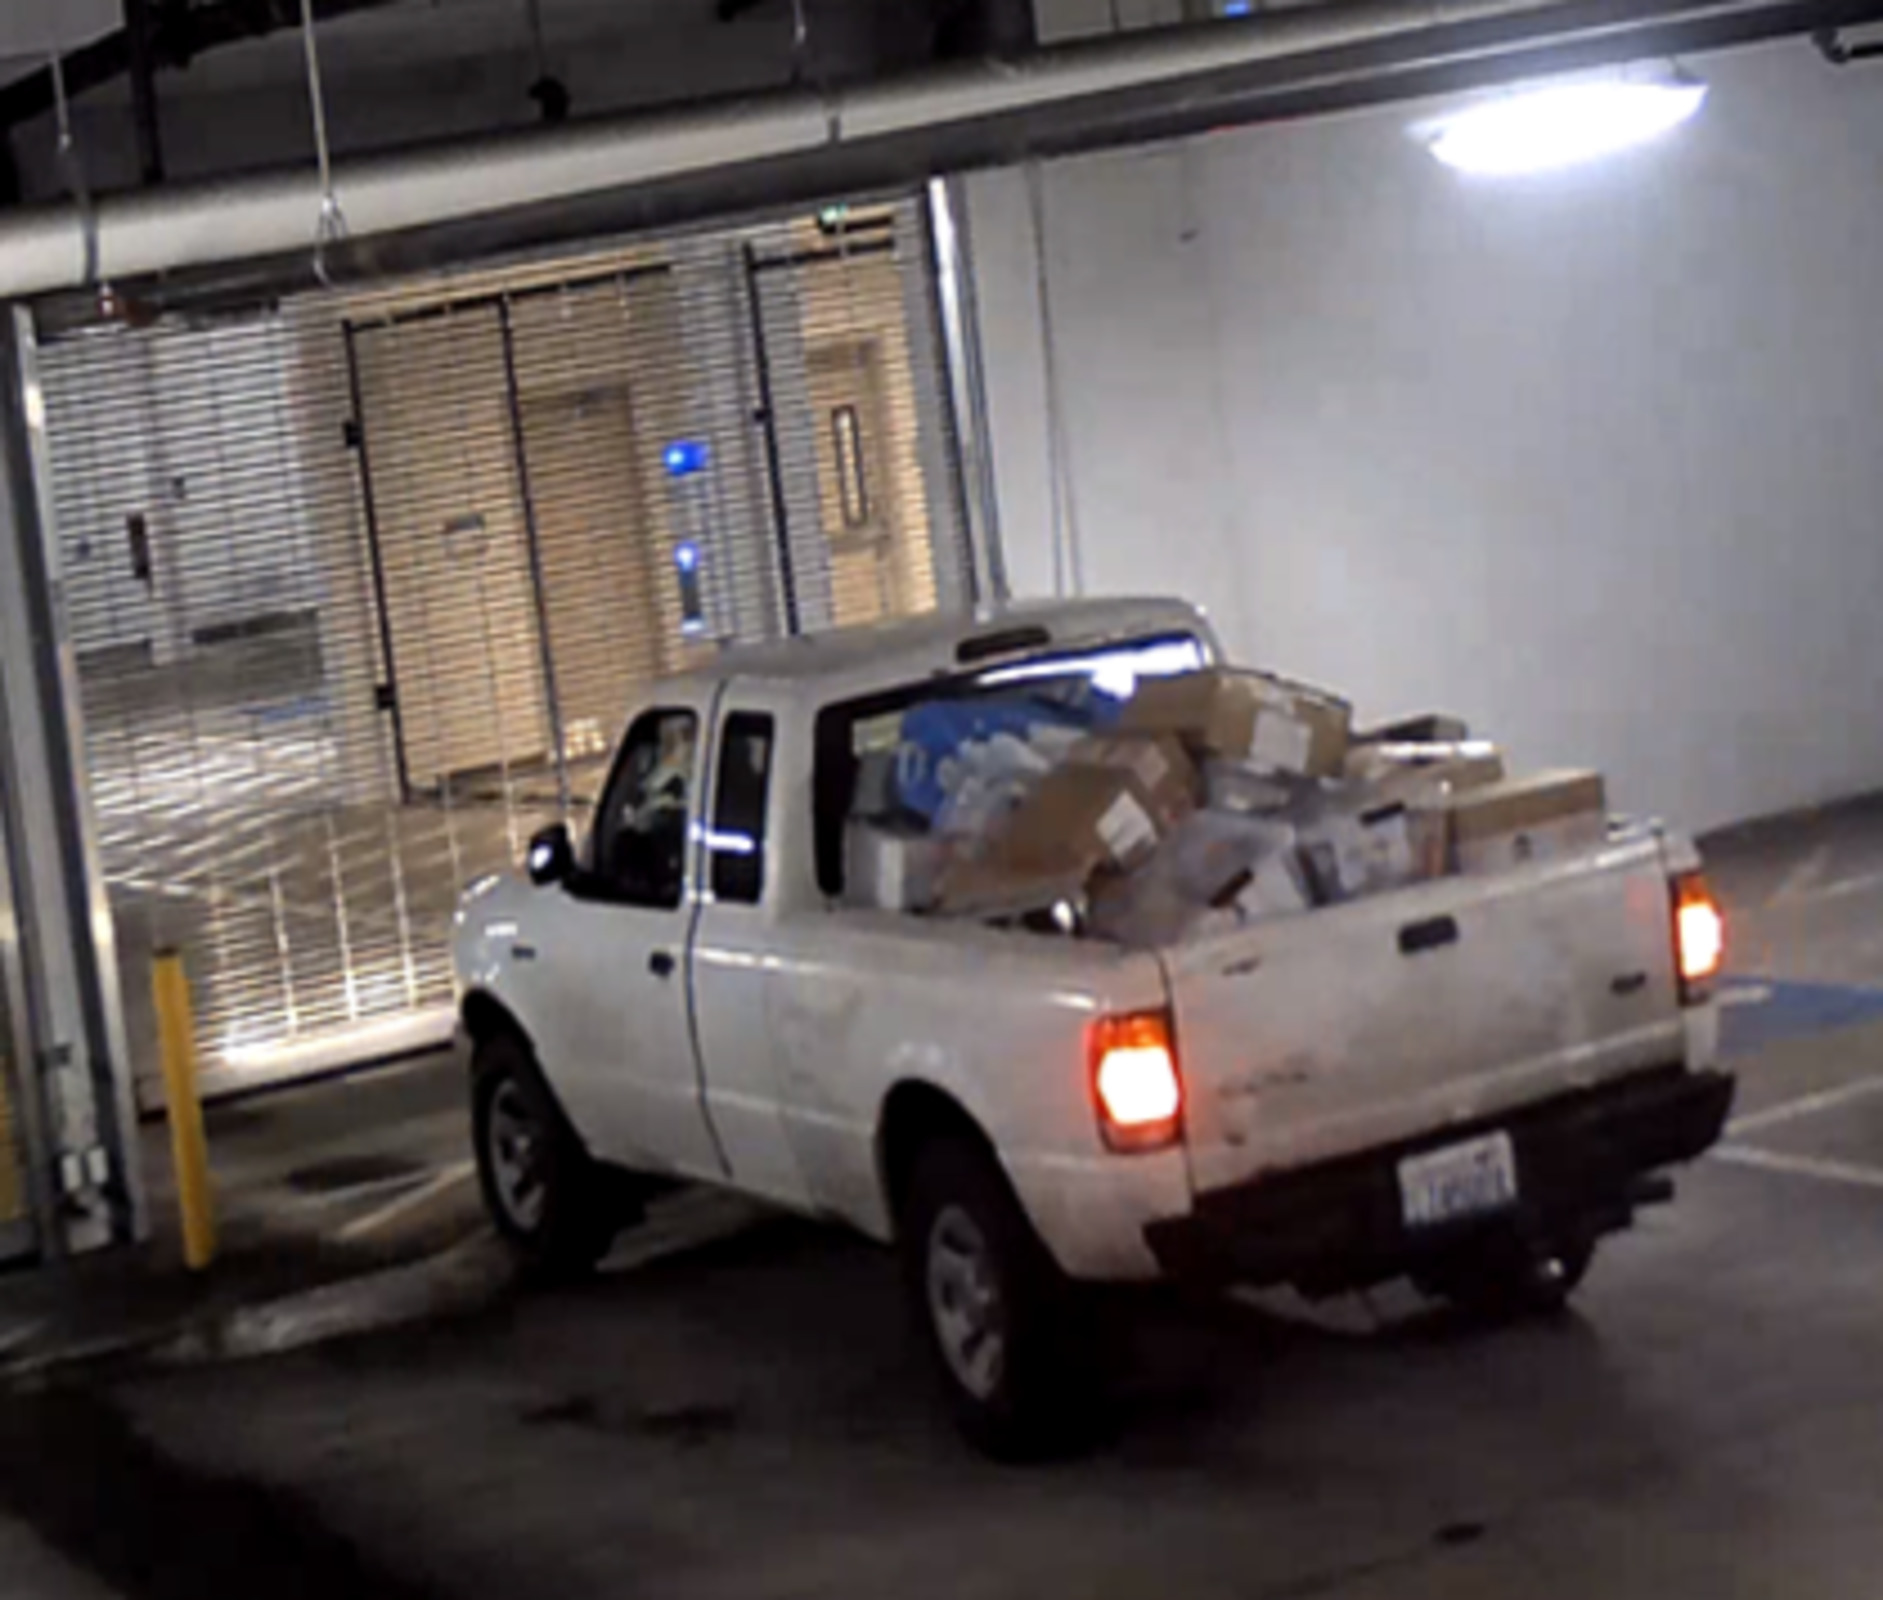 Bellevue Police share photo of white pickup truck used in alleged Pokemon cards burglary